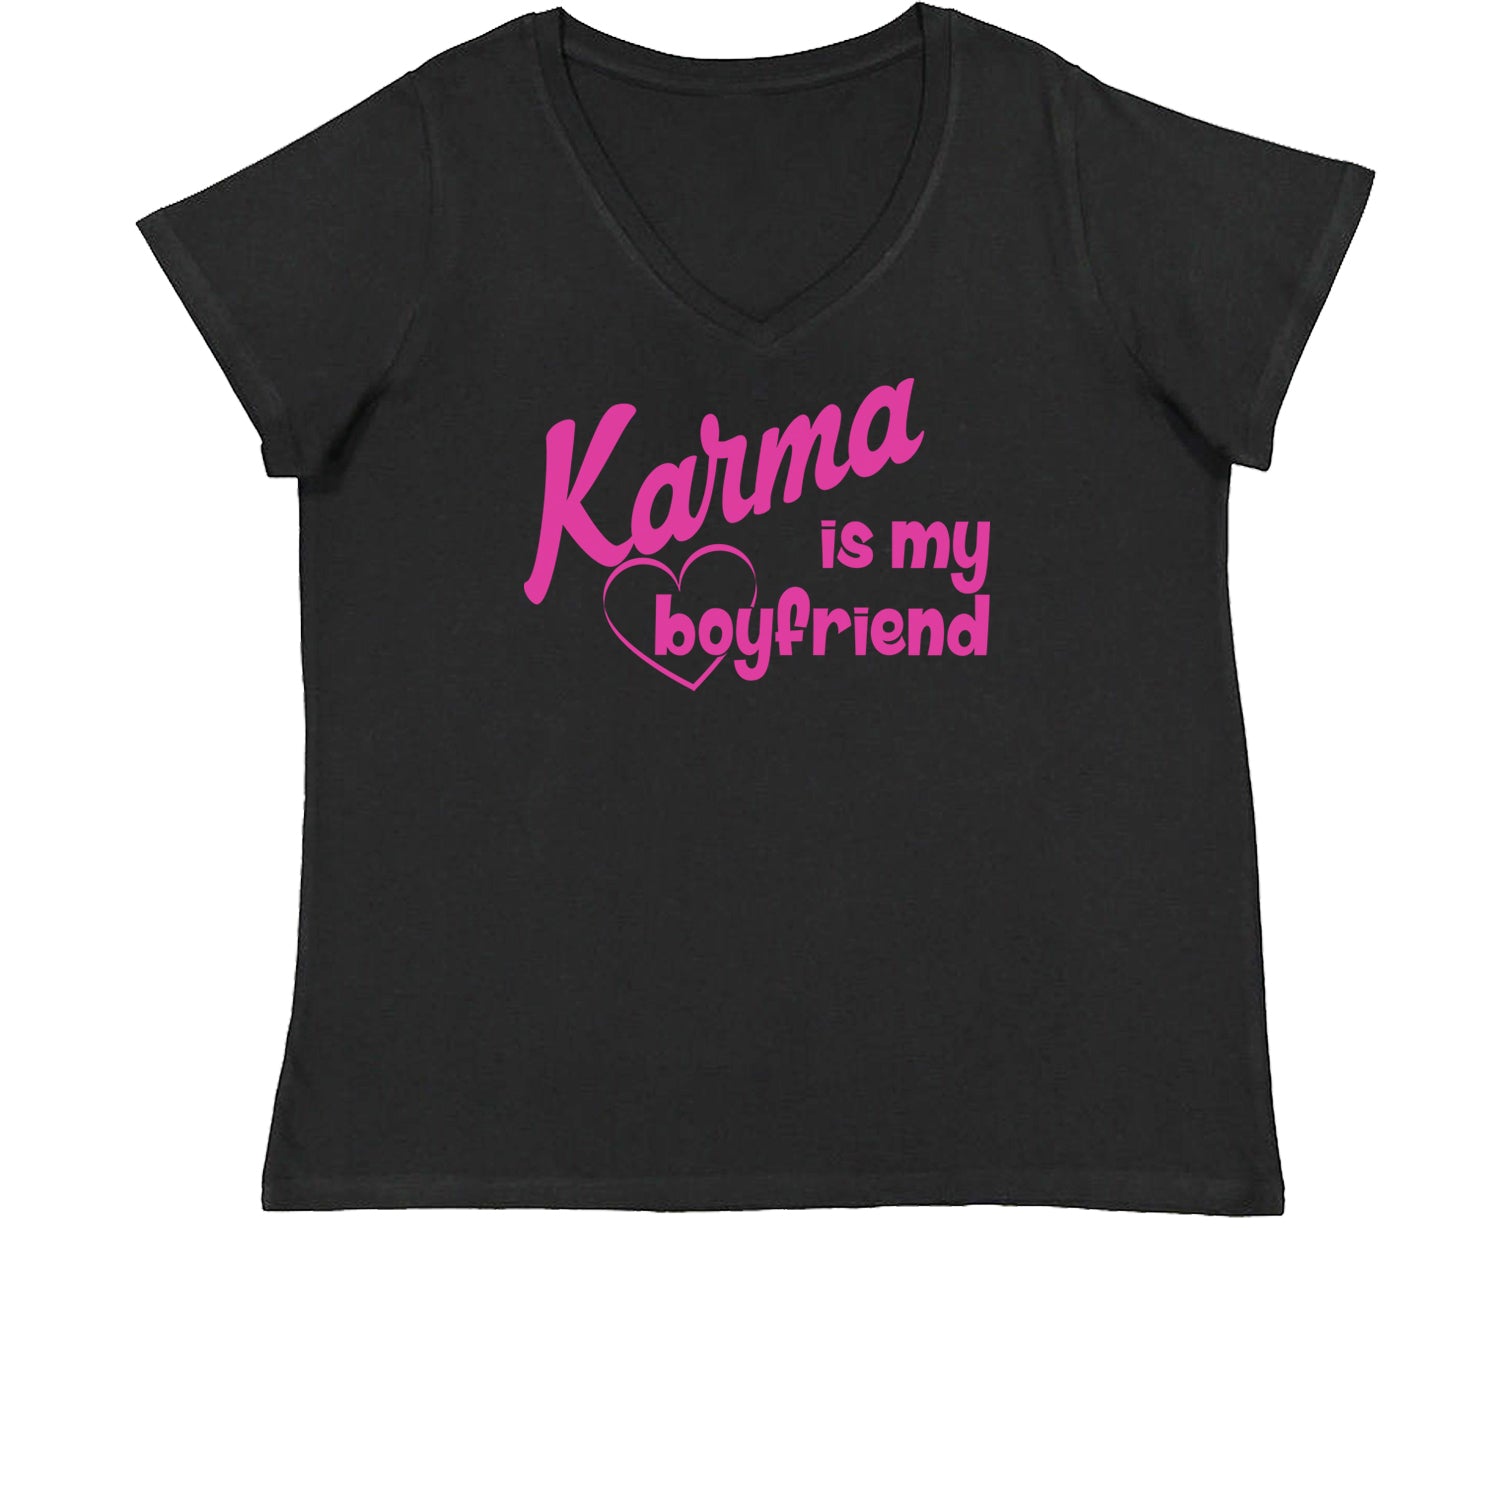 Karma Is My Boyfriend Womens Plus Size V-Neck T-shirt nation, taylornation by Expression Tees